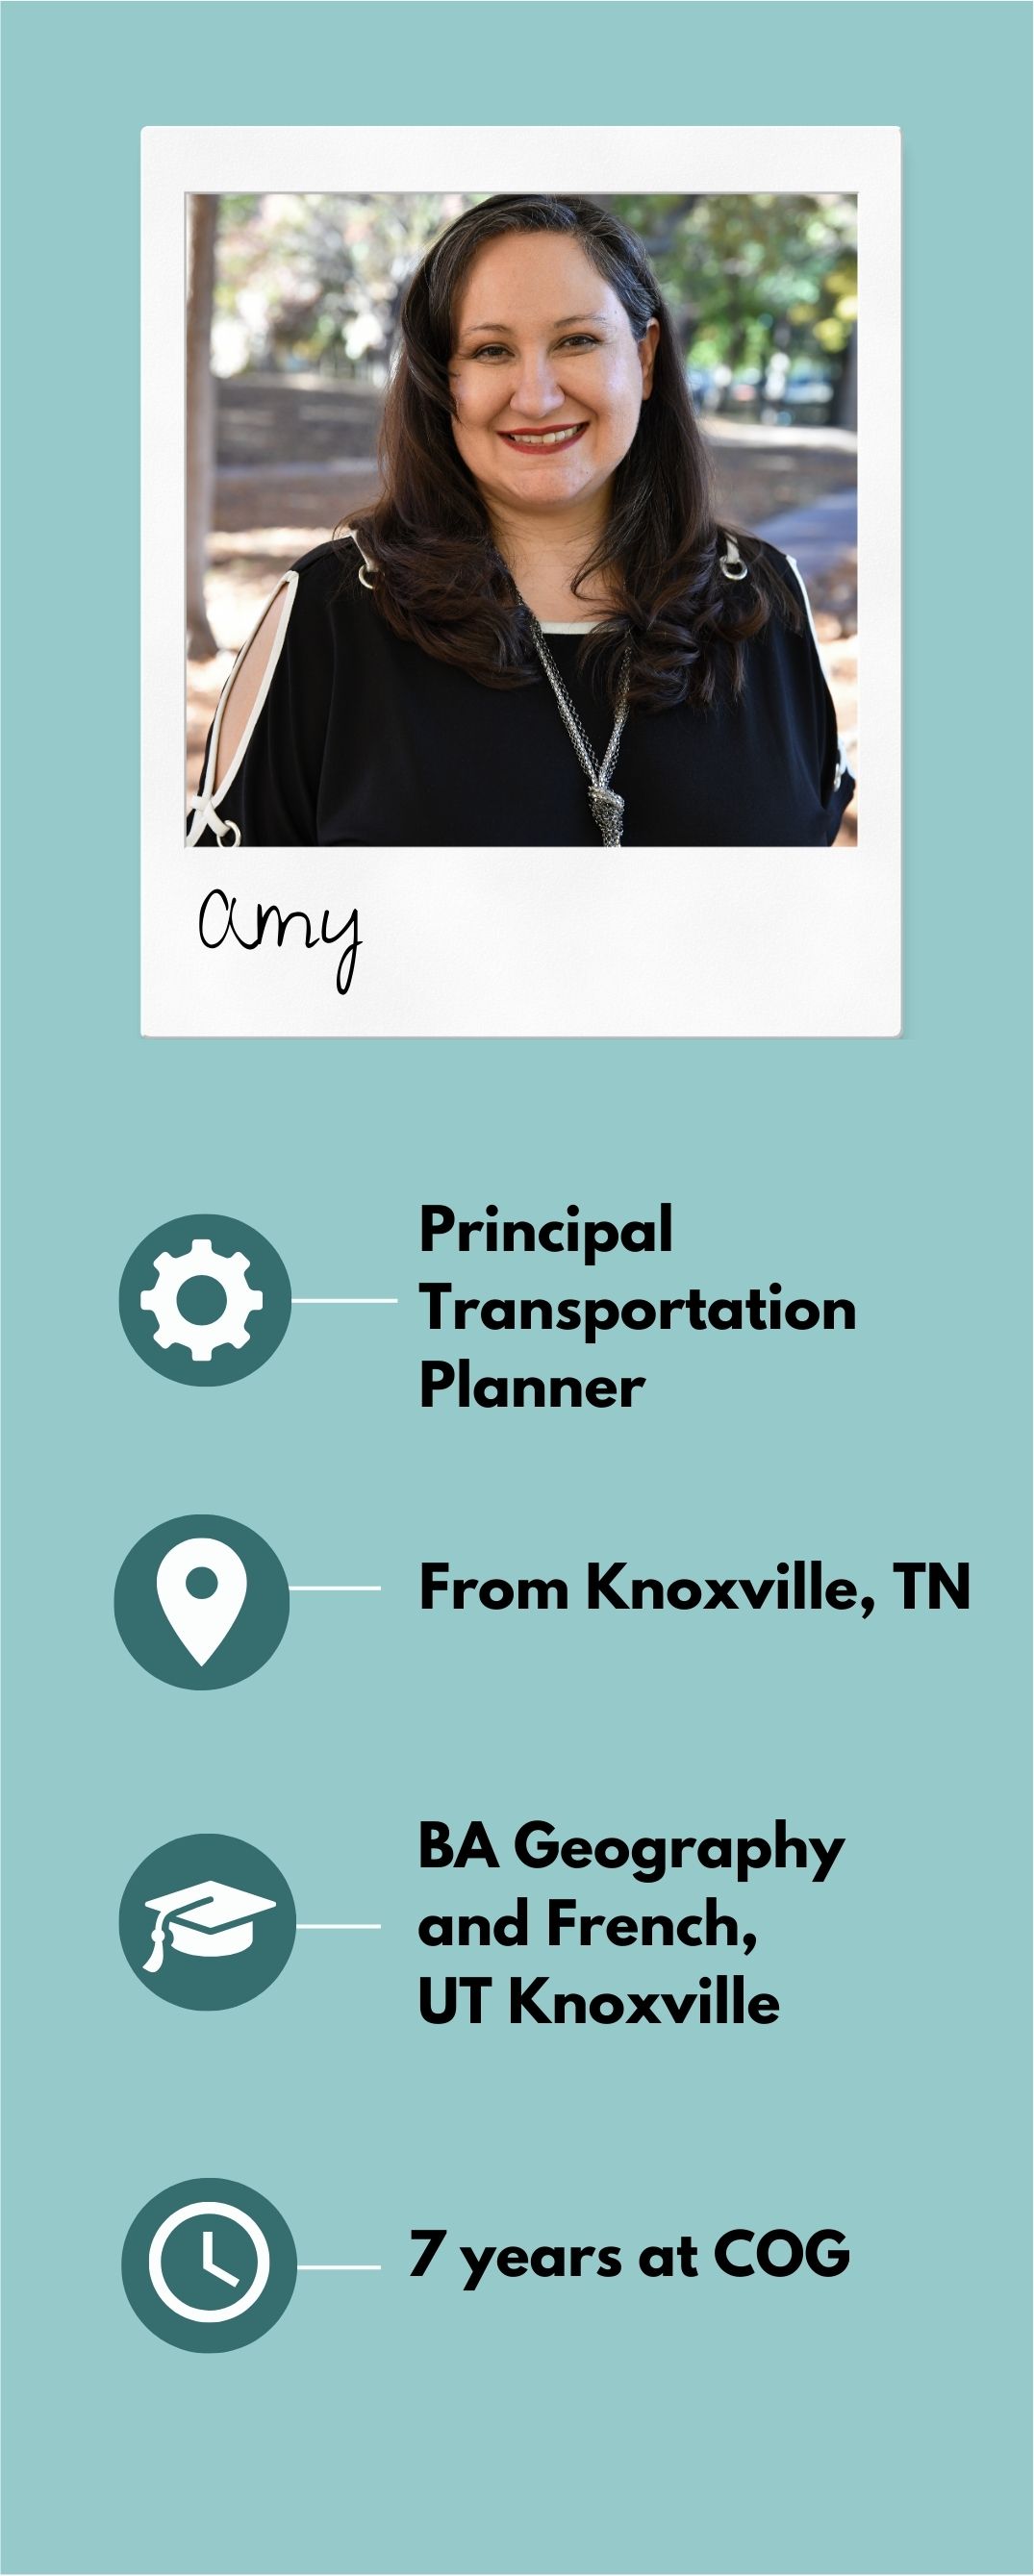 Photo of Amy Johnson- Planner at NCTCOG